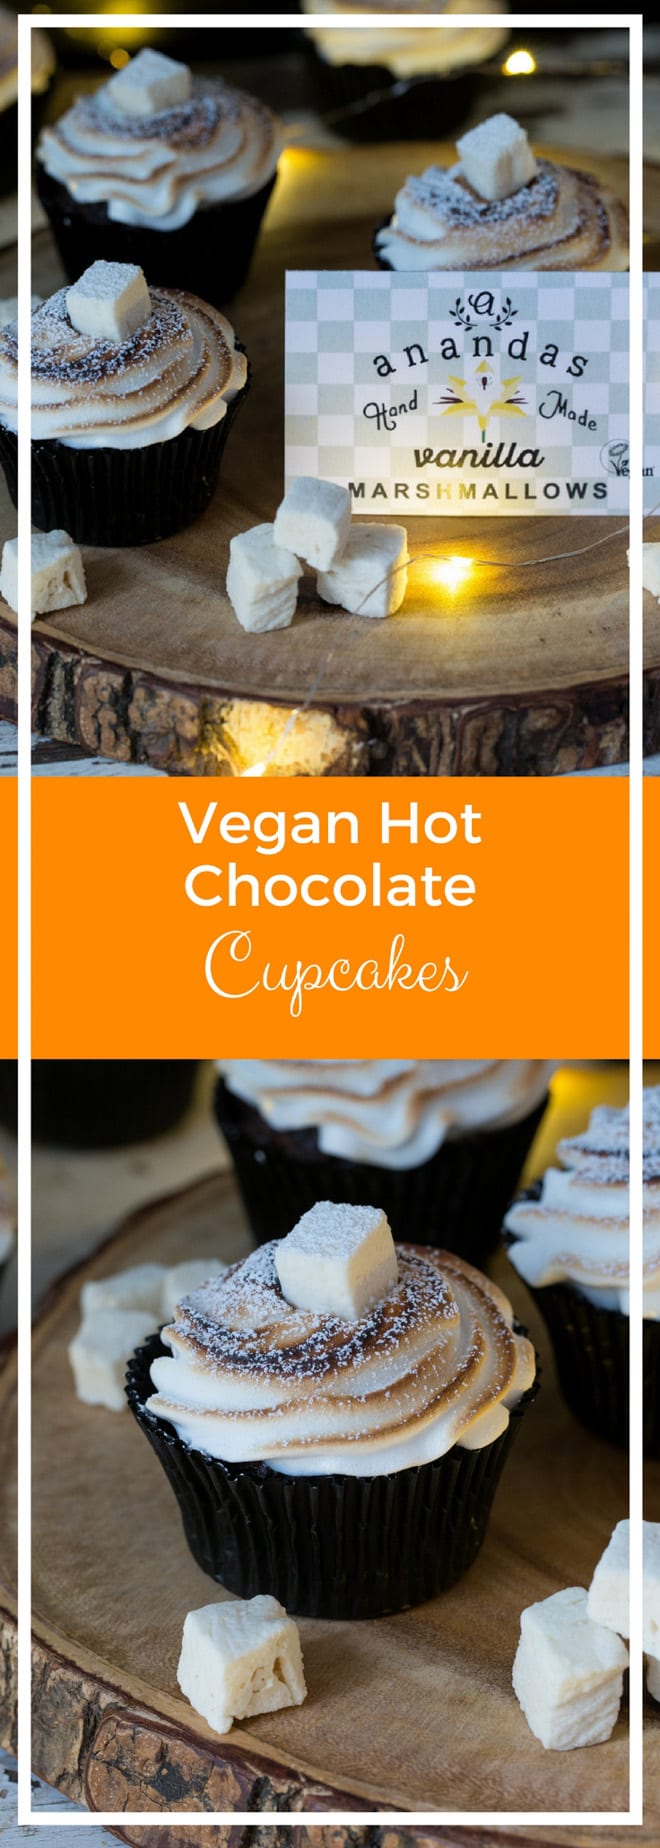 Vegan Hot Chocolate Muffins - with Vegan Marshmallow Frosting - yep you read that right! These are decadently rich, SO chocolatey and 100% vegan | thecookandhim.com